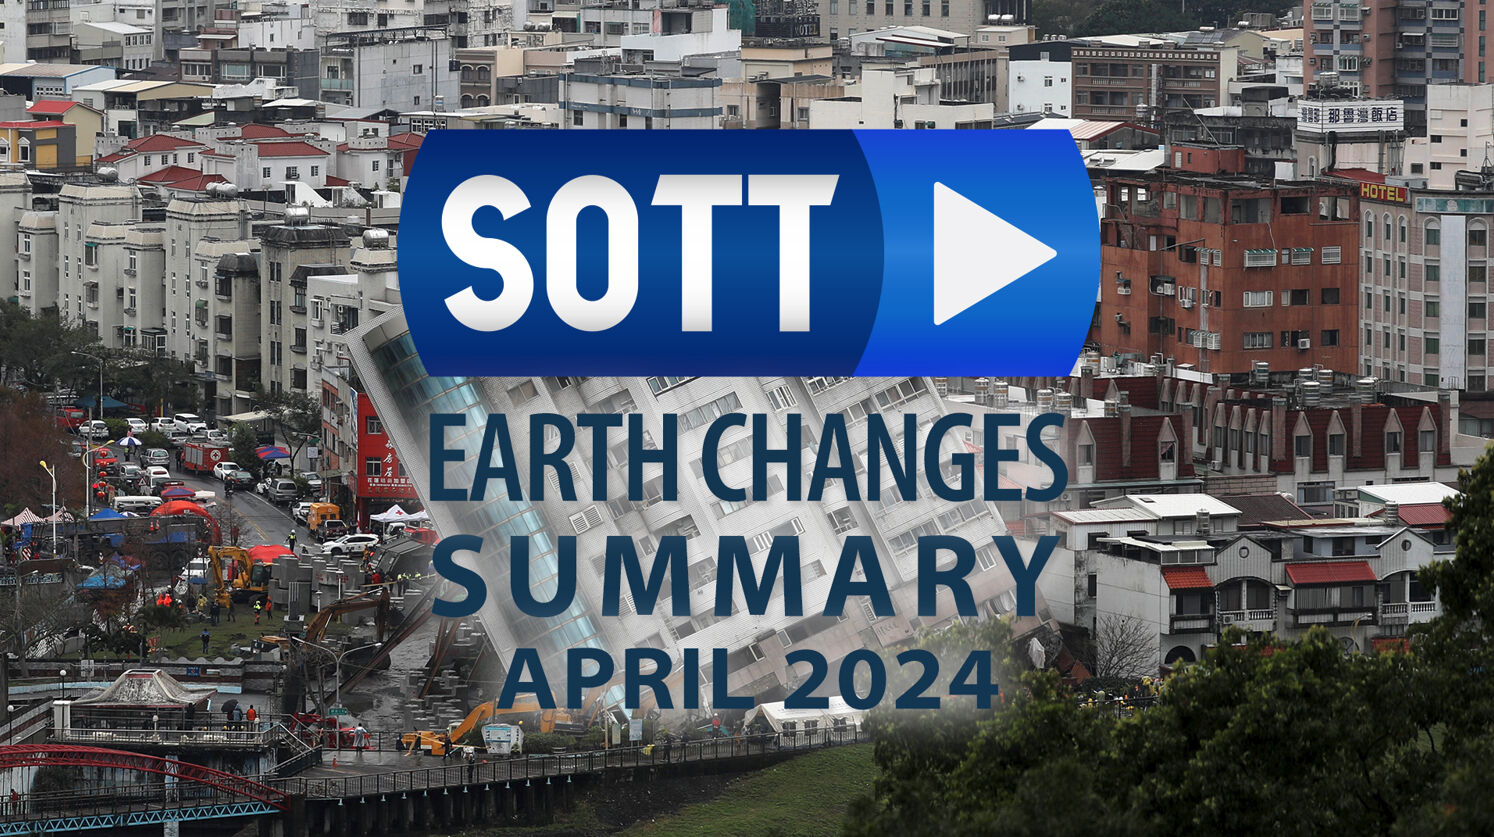 SOTT Earth Changes Summary - April 2024: Extreme Weather, Planetary Upheaval, Meteor Fireballs